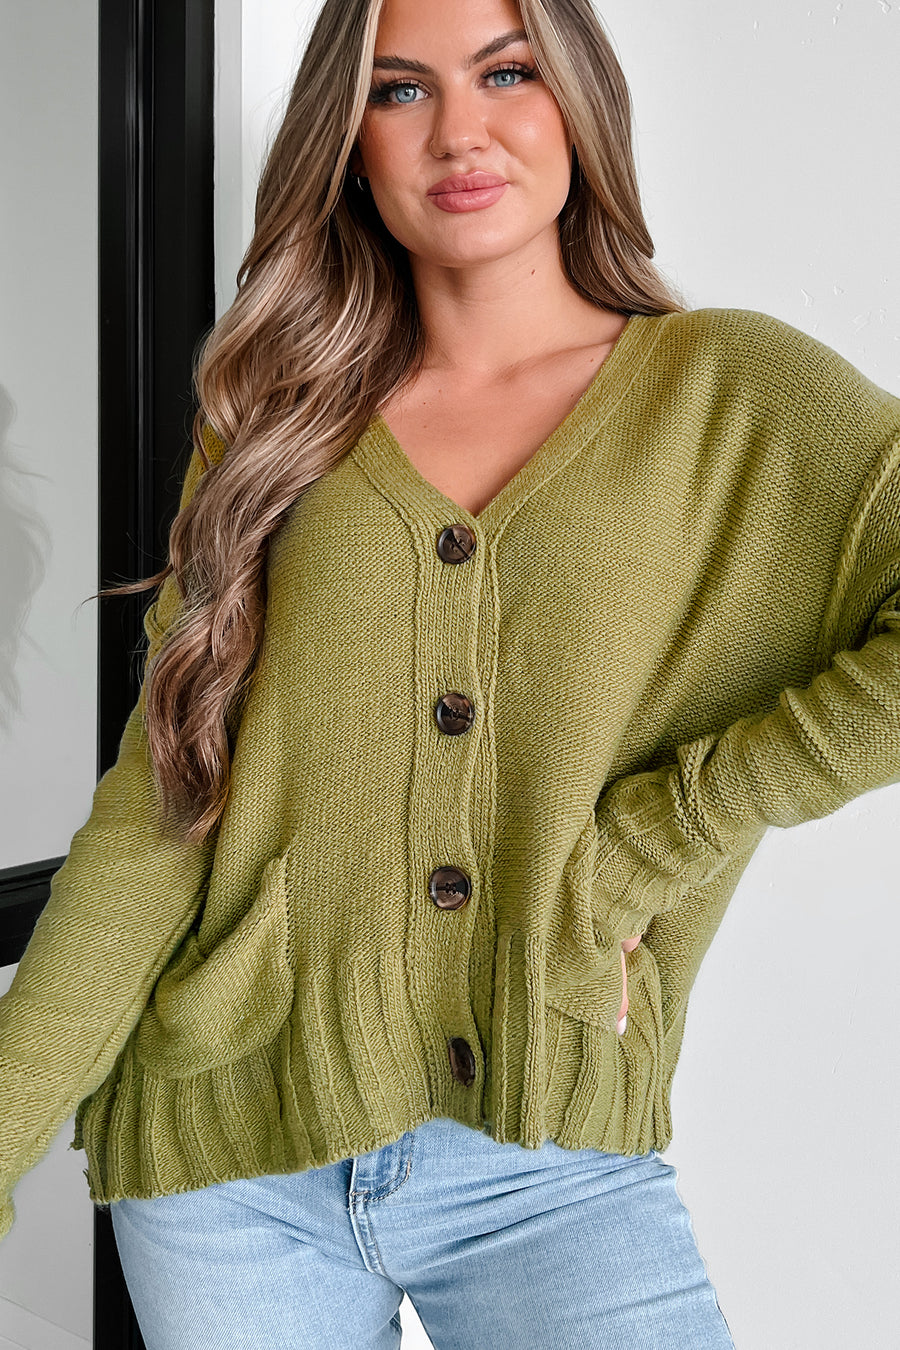 Say No More Button Front Sweater Cardigan (Light Olive) - NanaMacs